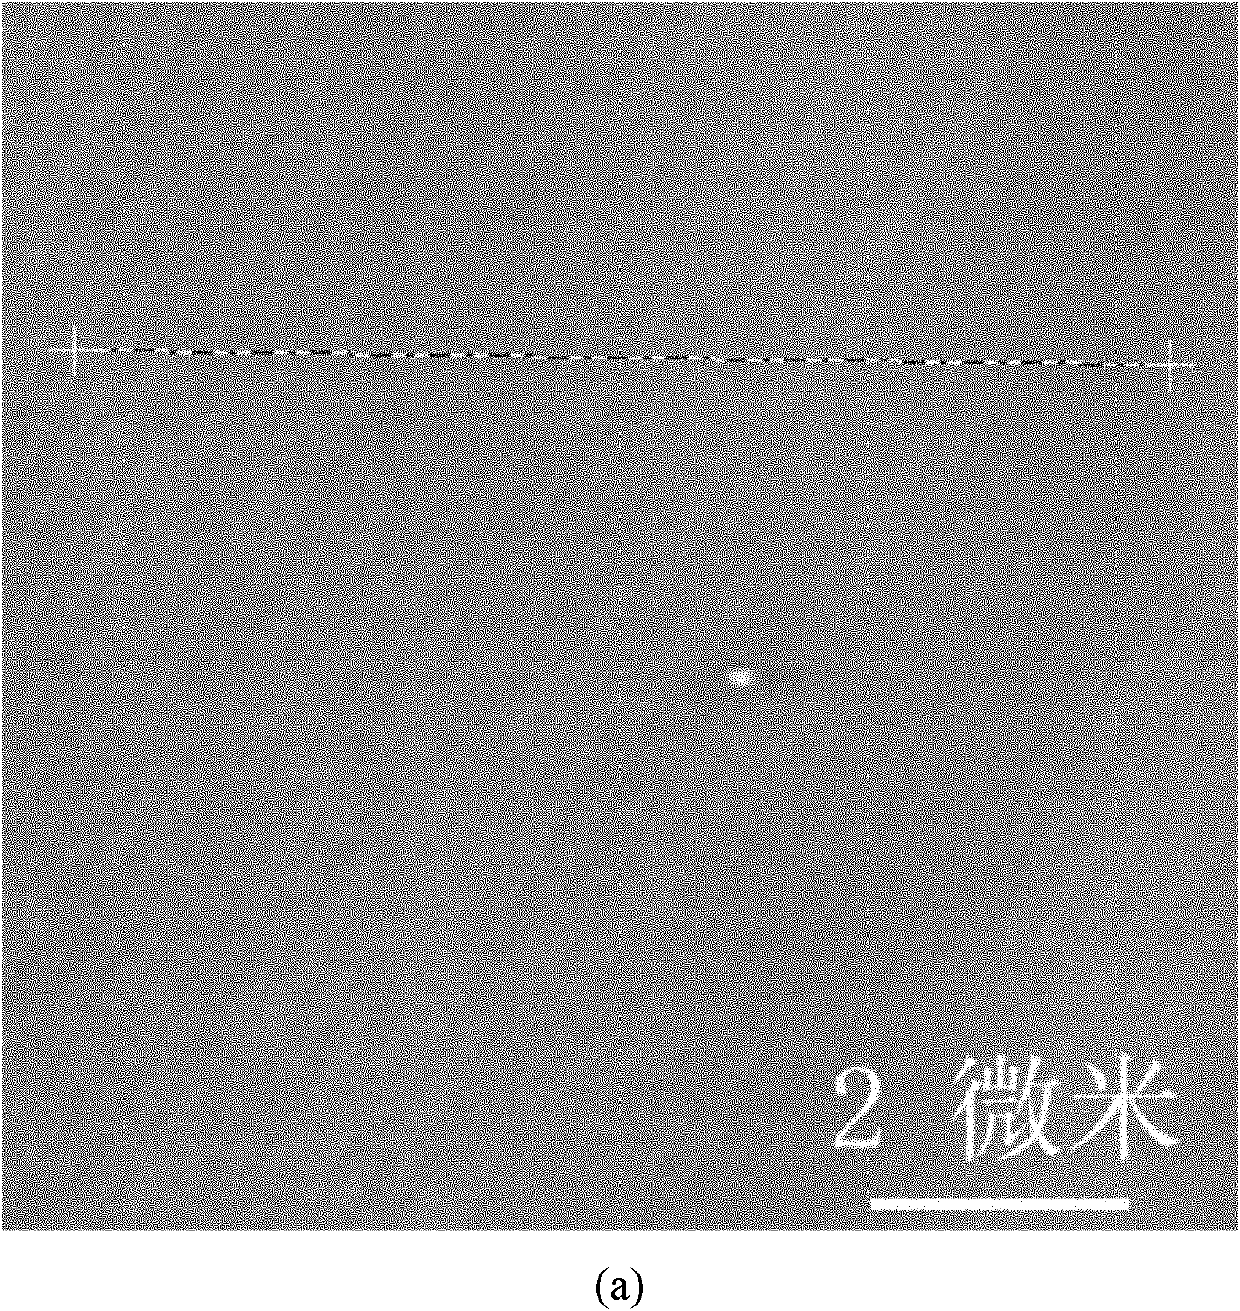 Adjustment method of SiC (silicon carbide) single crystal flatness by wet etching